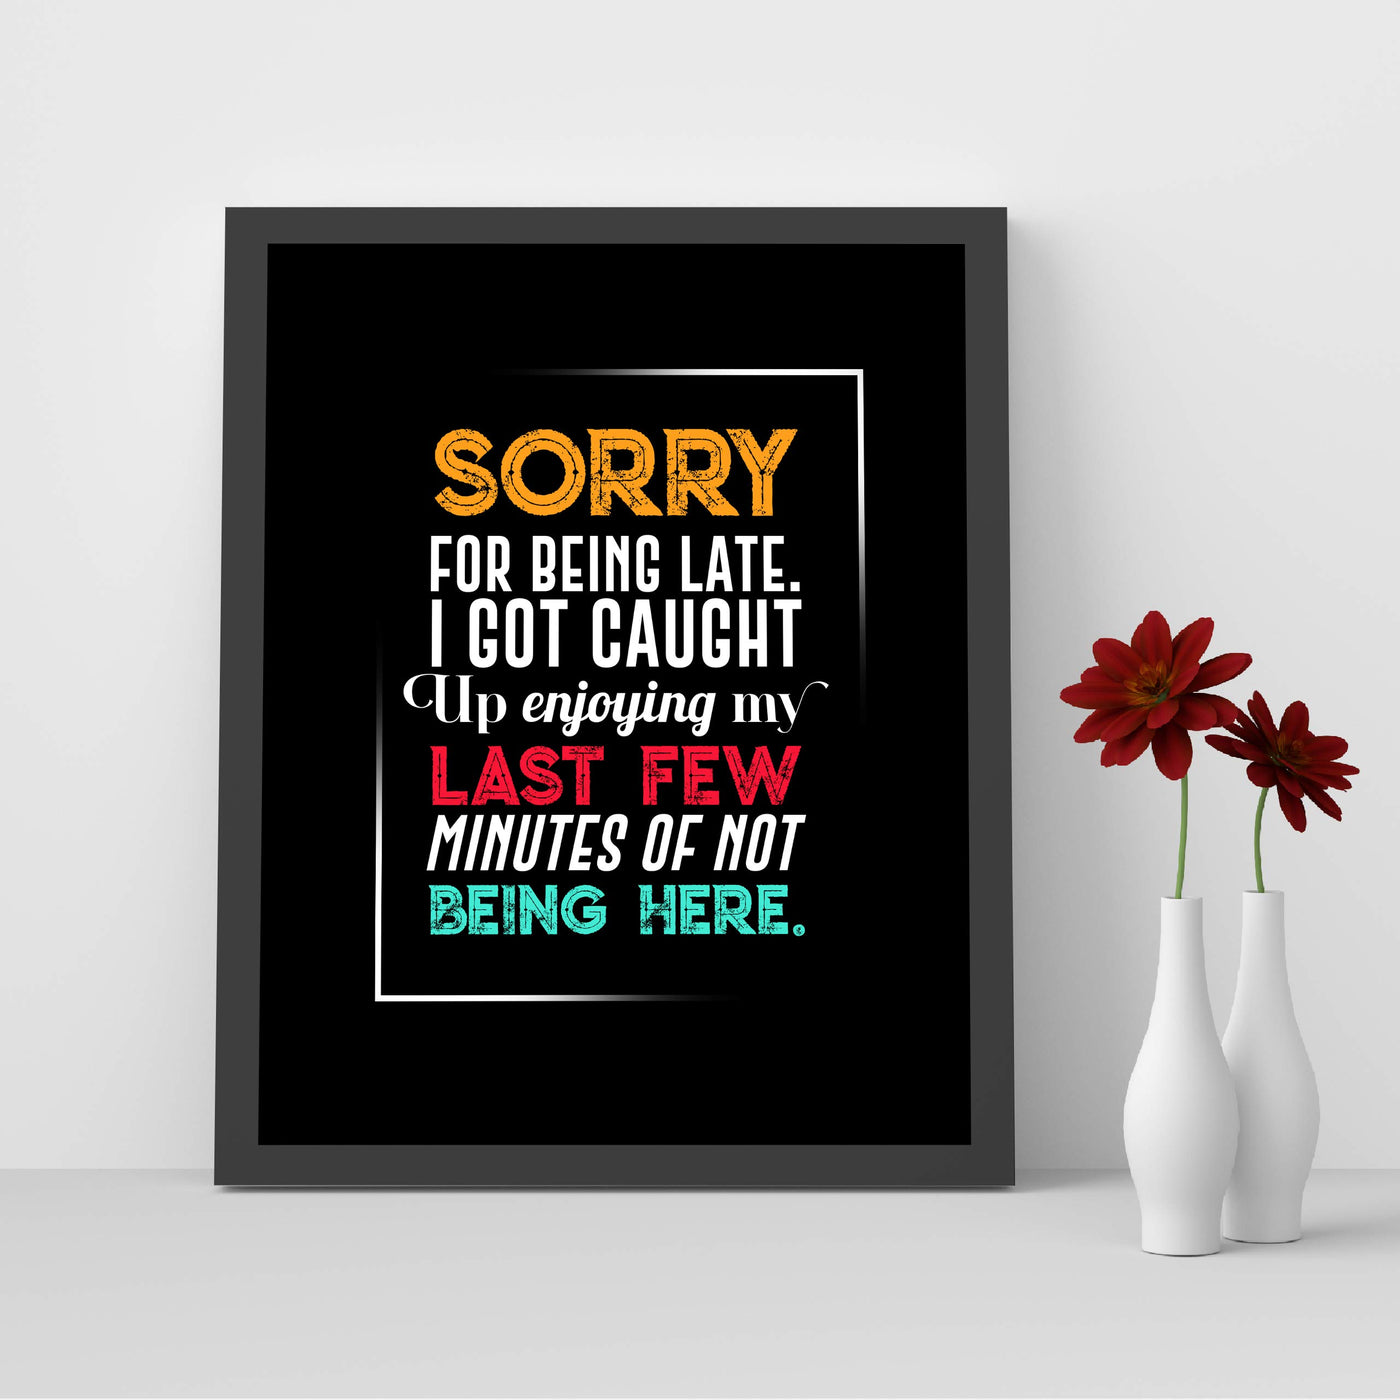 Sorry for Being Late-Got Caught Up Not Being Here Funny Office Sign -8 x 10" Typographic Wall Print-Ready to Frame. Humorous Home-Desk-Cubicle-Classroom Decor. Fun Gift for Sarcastic Co-Workers!